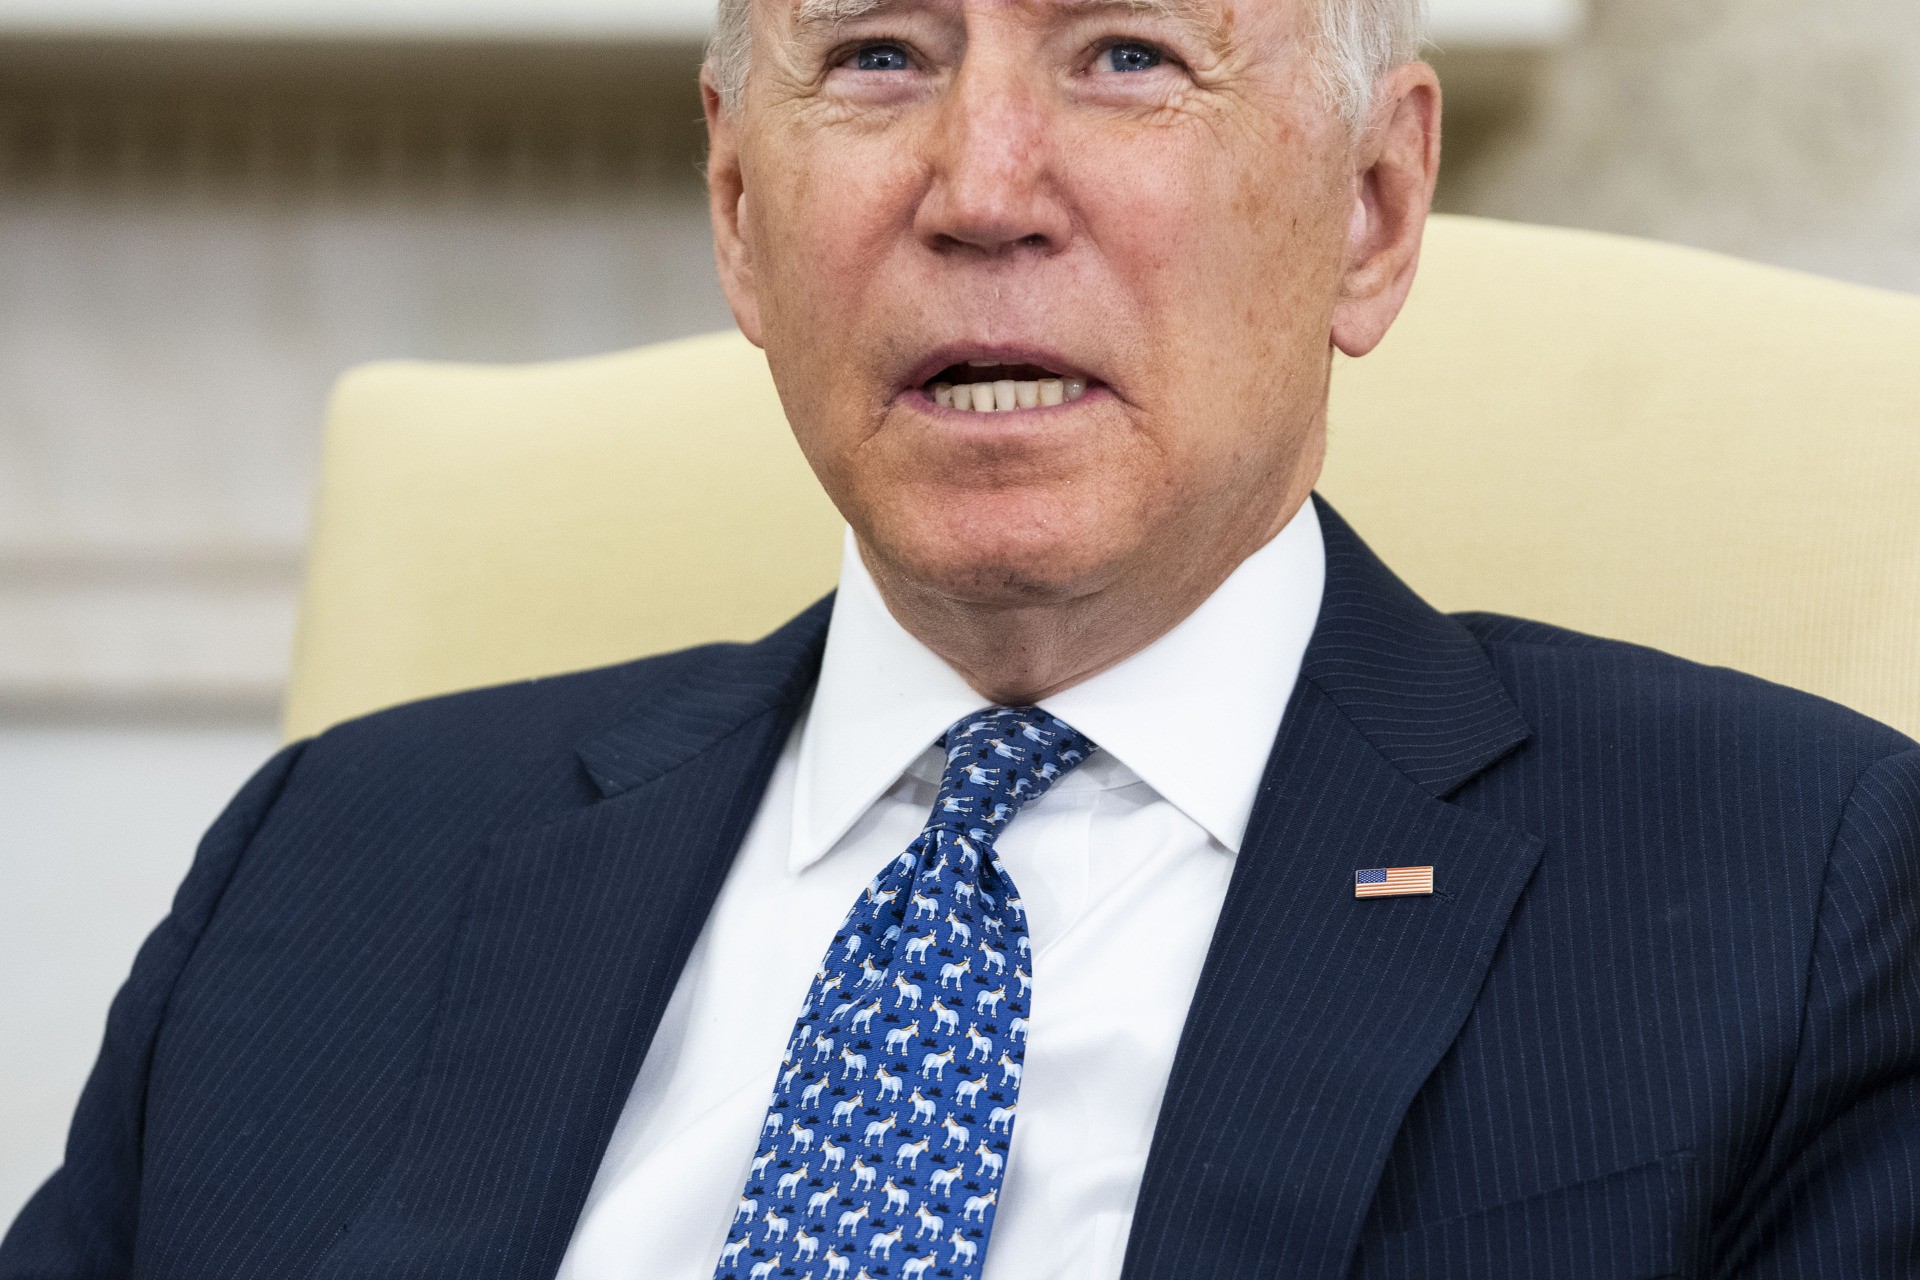 WASHINGTON, DC - SEPTEMBER 01: Wearing a necktie decorated with donkeys, U.S. President Joe Biden listens to Ukrainian President Volodymyr Zelensky during a press availability in the Oval Office at the White House on September 01, 2021 in Washington, DC. This was the two leaders' first face-to-face meeting and the first by a Ukrainian leader in more than four years. (Photo by Doug Mills-Pool/Getty Images)